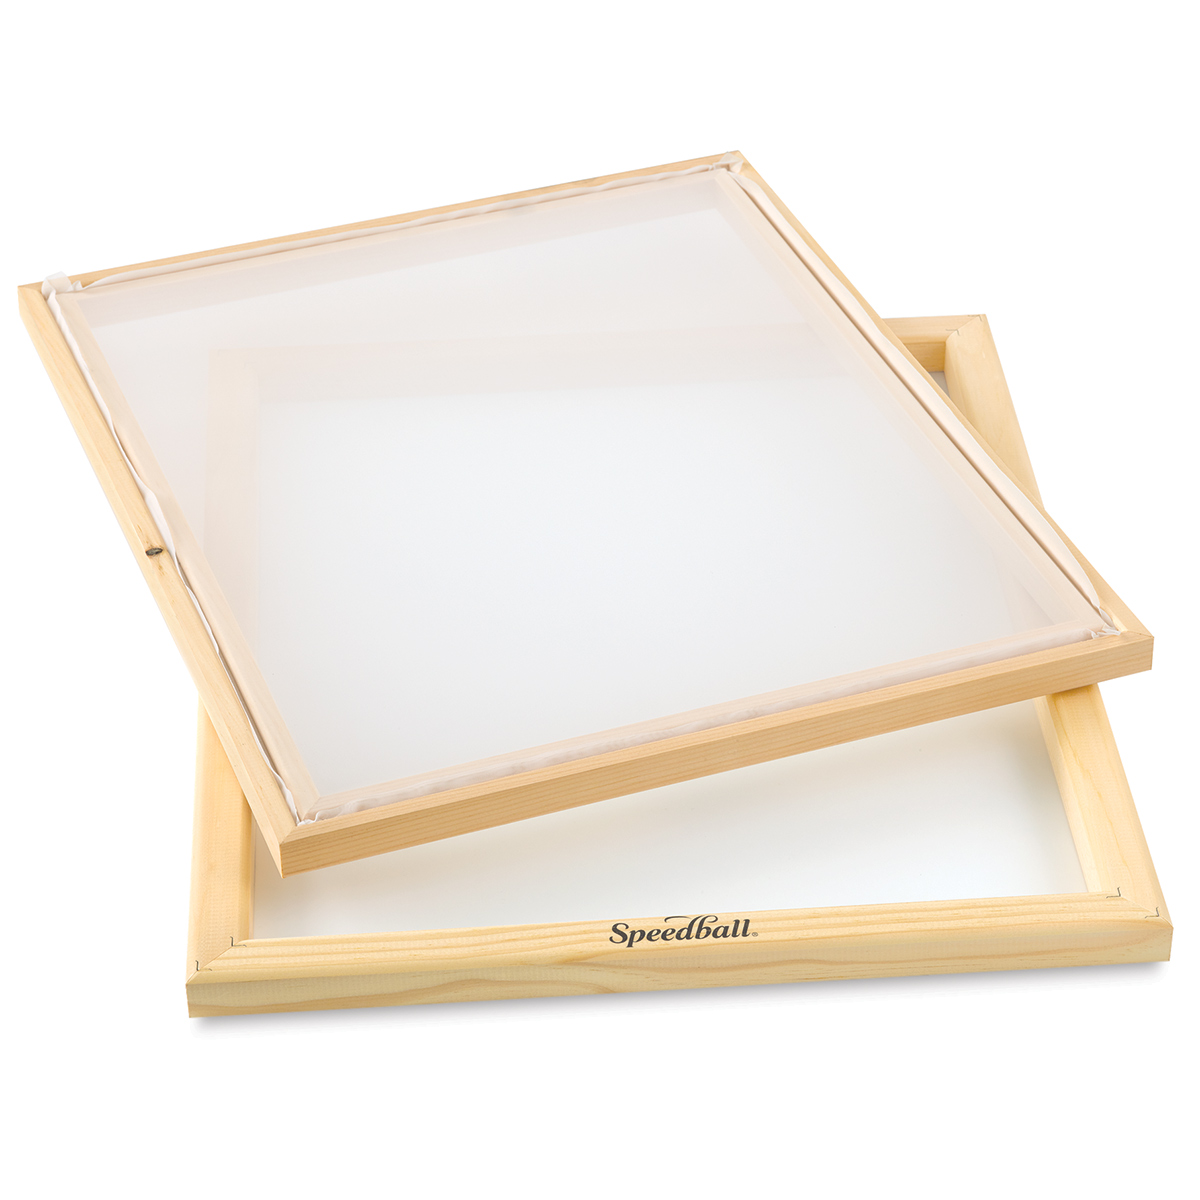 Speedball Aluminum Screen Printing Frame, 20 X 24 inches, 110 Mesh Count,  White (004770)